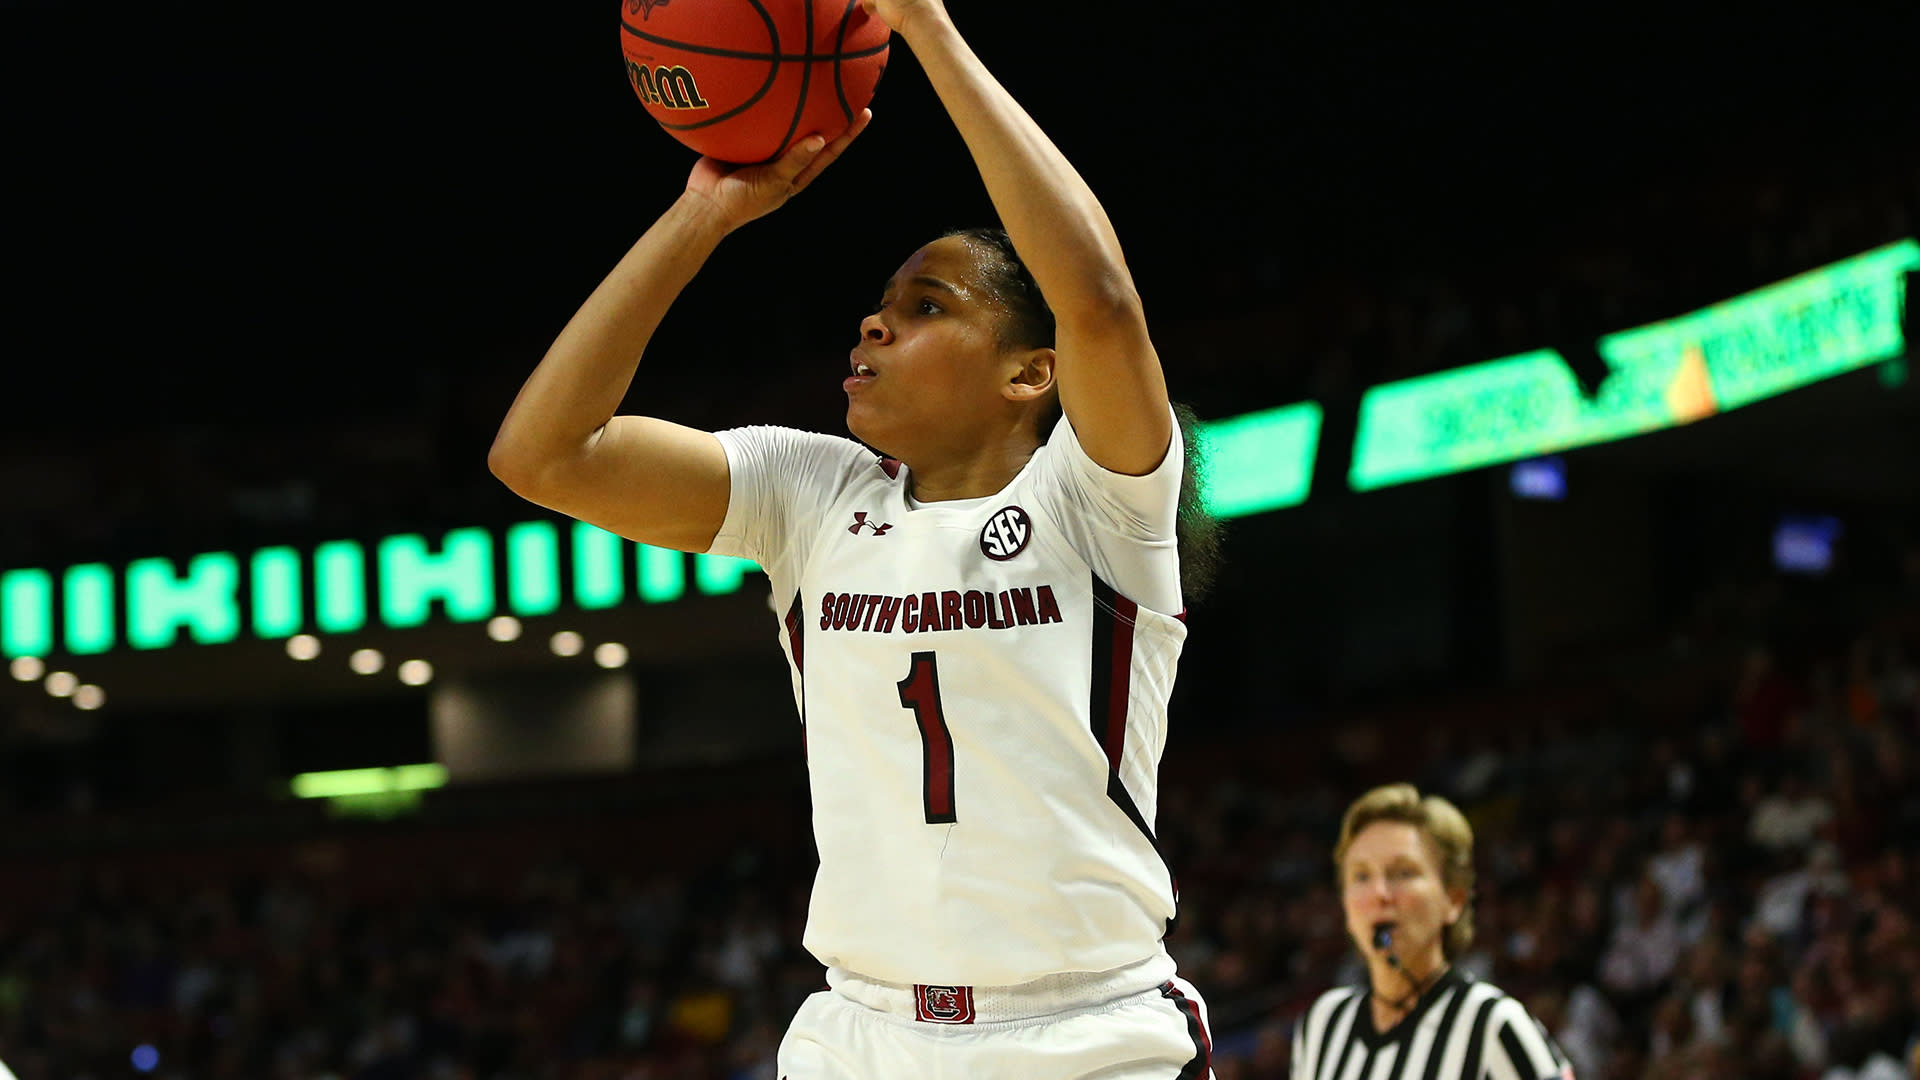 Cooke leads South Carolina No. 5 in 103-41 victory over Temple